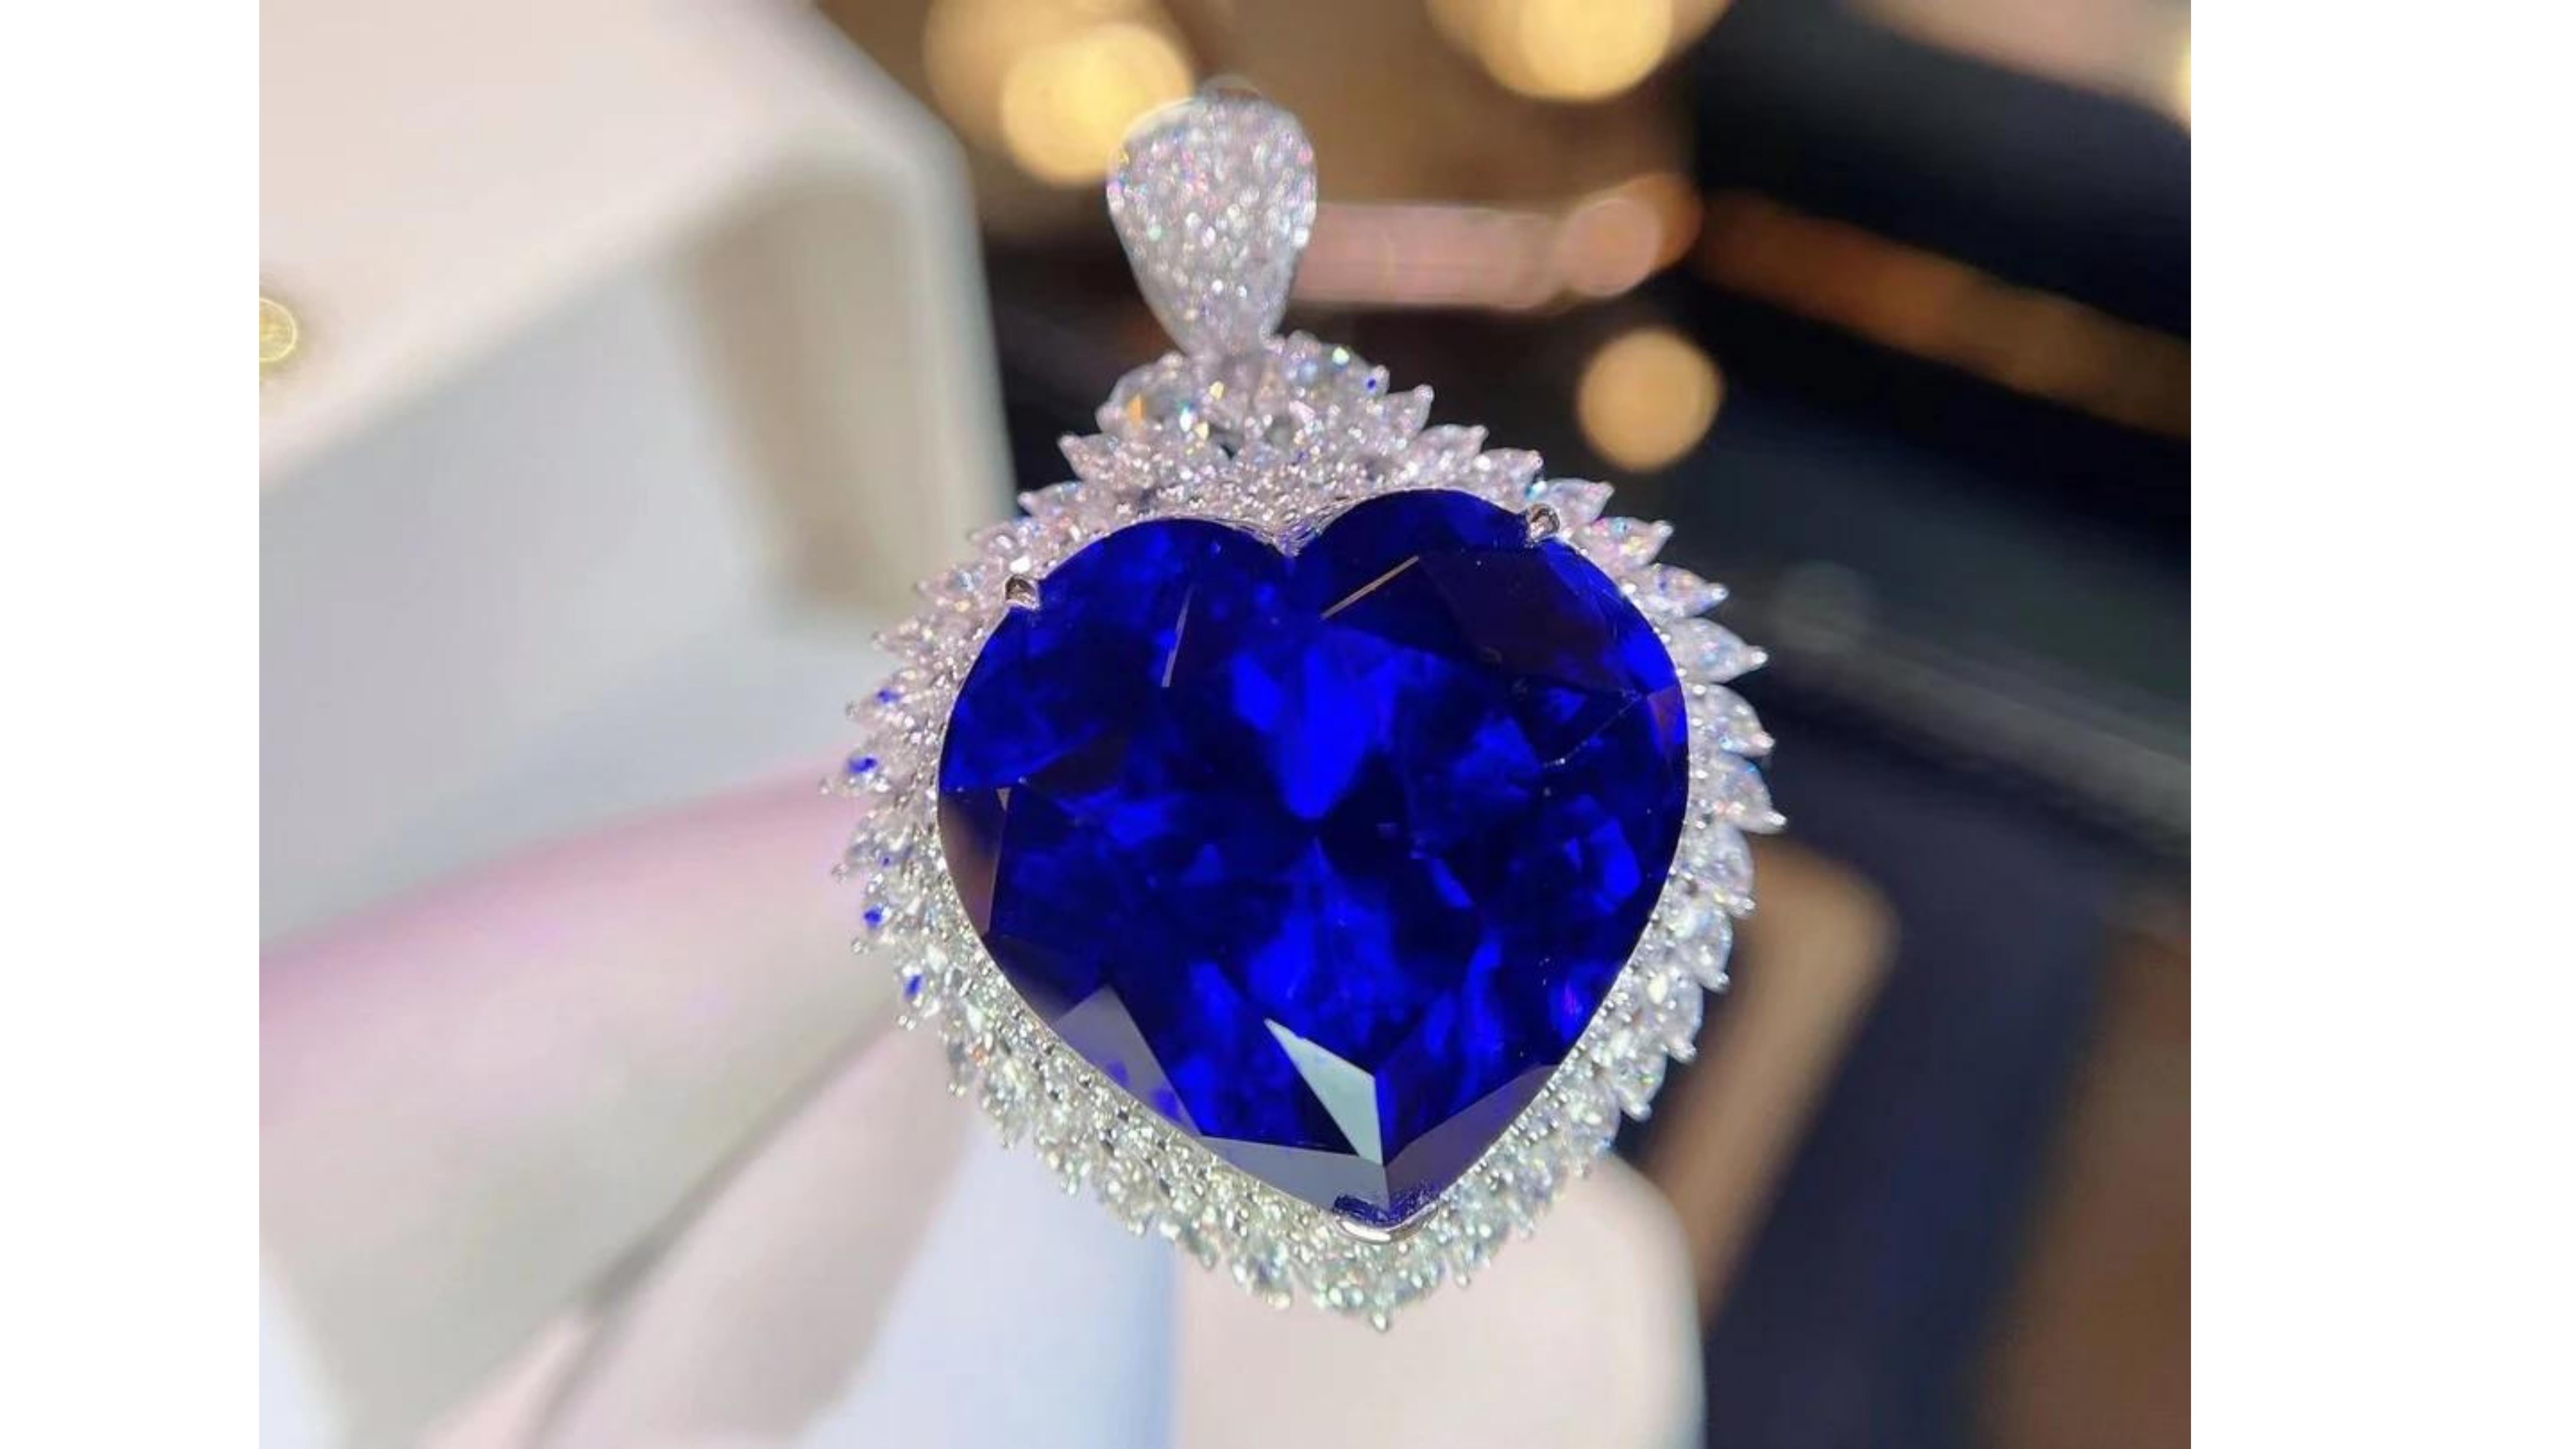 
29.8 Carat Tanzanite Necklace  Heart Shape with 189 White Diamonds is truly spectacular with its duel use as a ring too.  It comes with chain and set in 18 Karat White Gold


  Tanzanite is a fairly “new” gemstone, discovered in 1967. It is only